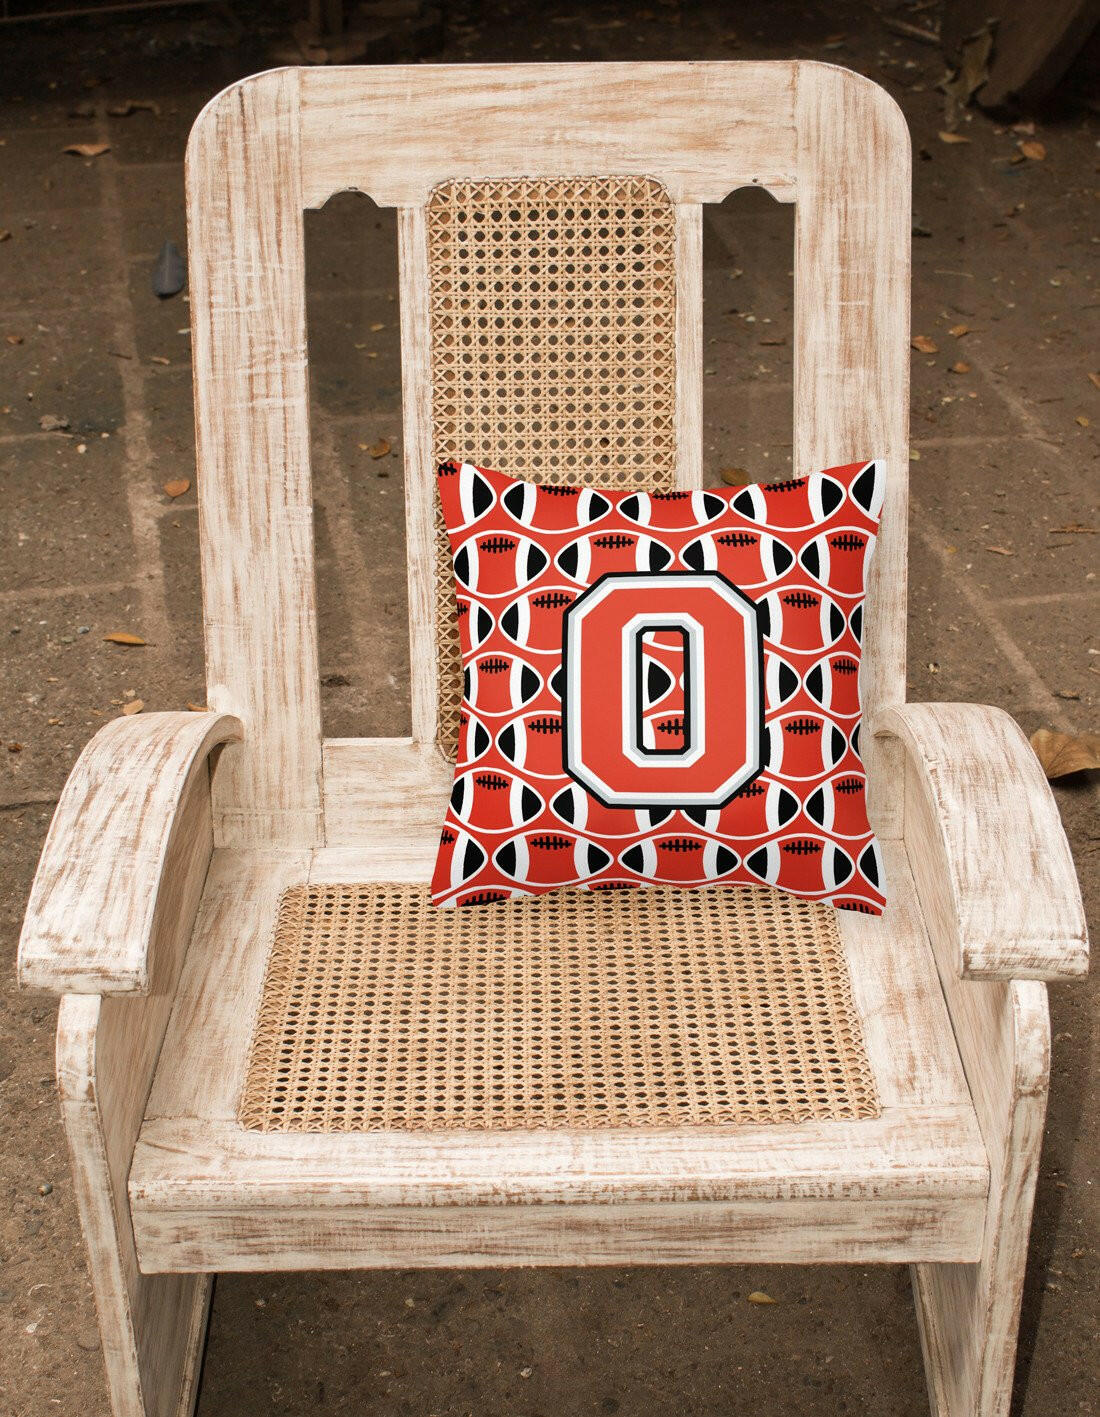 Letter O Football Scarlet and Grey Fabric Decorative Pillow CJ1067-OPW1414 by Caroline's Treasures